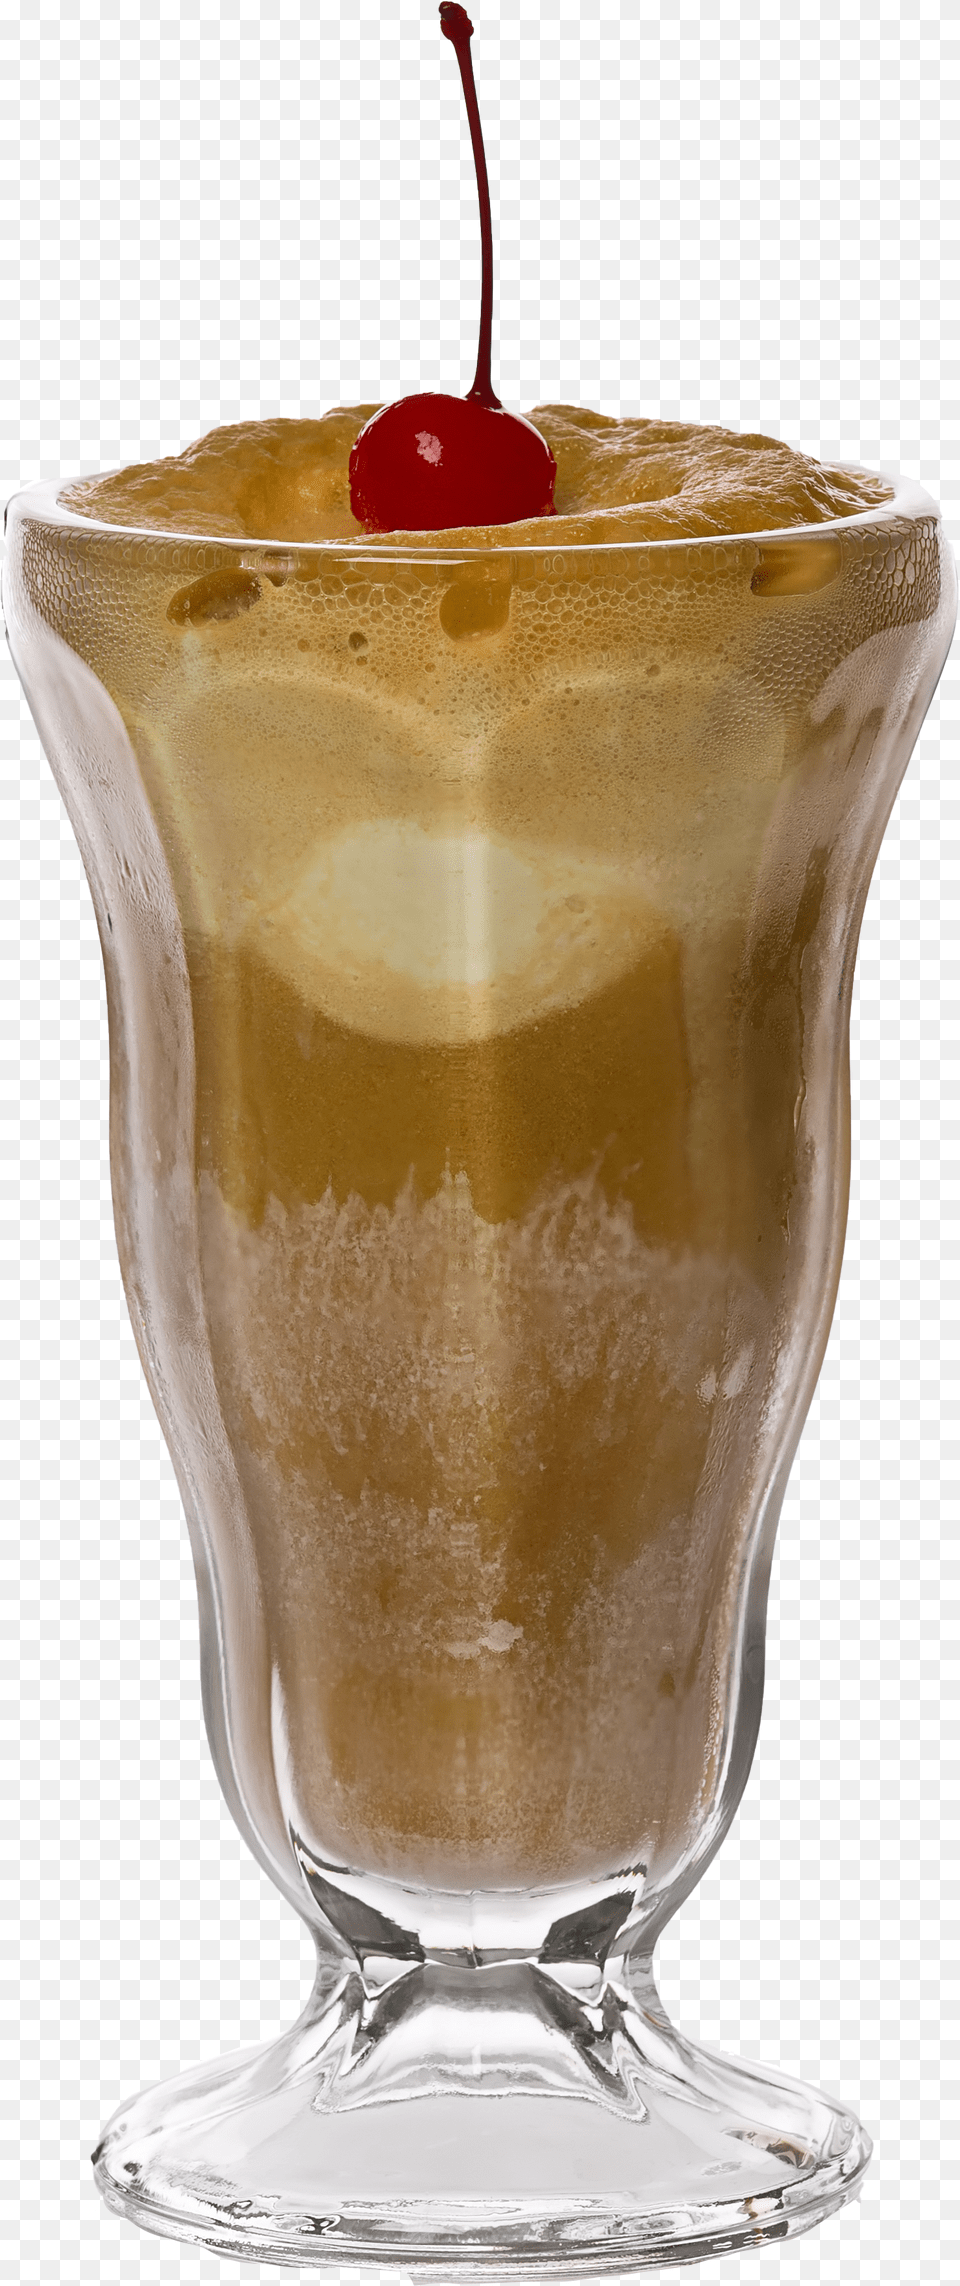 Root Beer Float Root Beer Float Without Background, Food, Cream, Dessert, Ice Cream Png